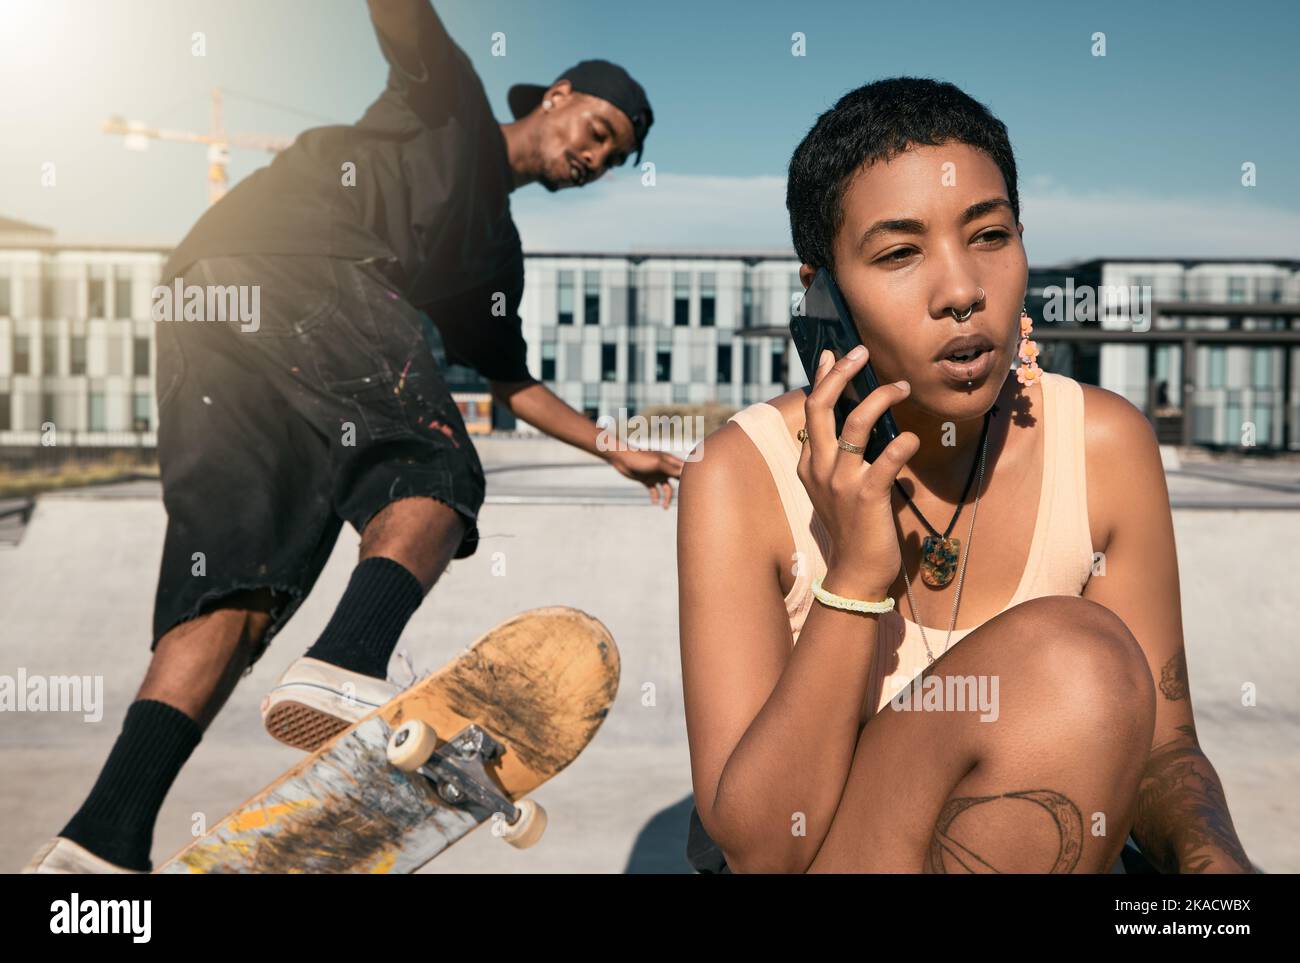 Skateboard, summer and phone call with friends at urban city hangout in sunshine together. Skater people at recreation facility for outdoor activity Stock Photo